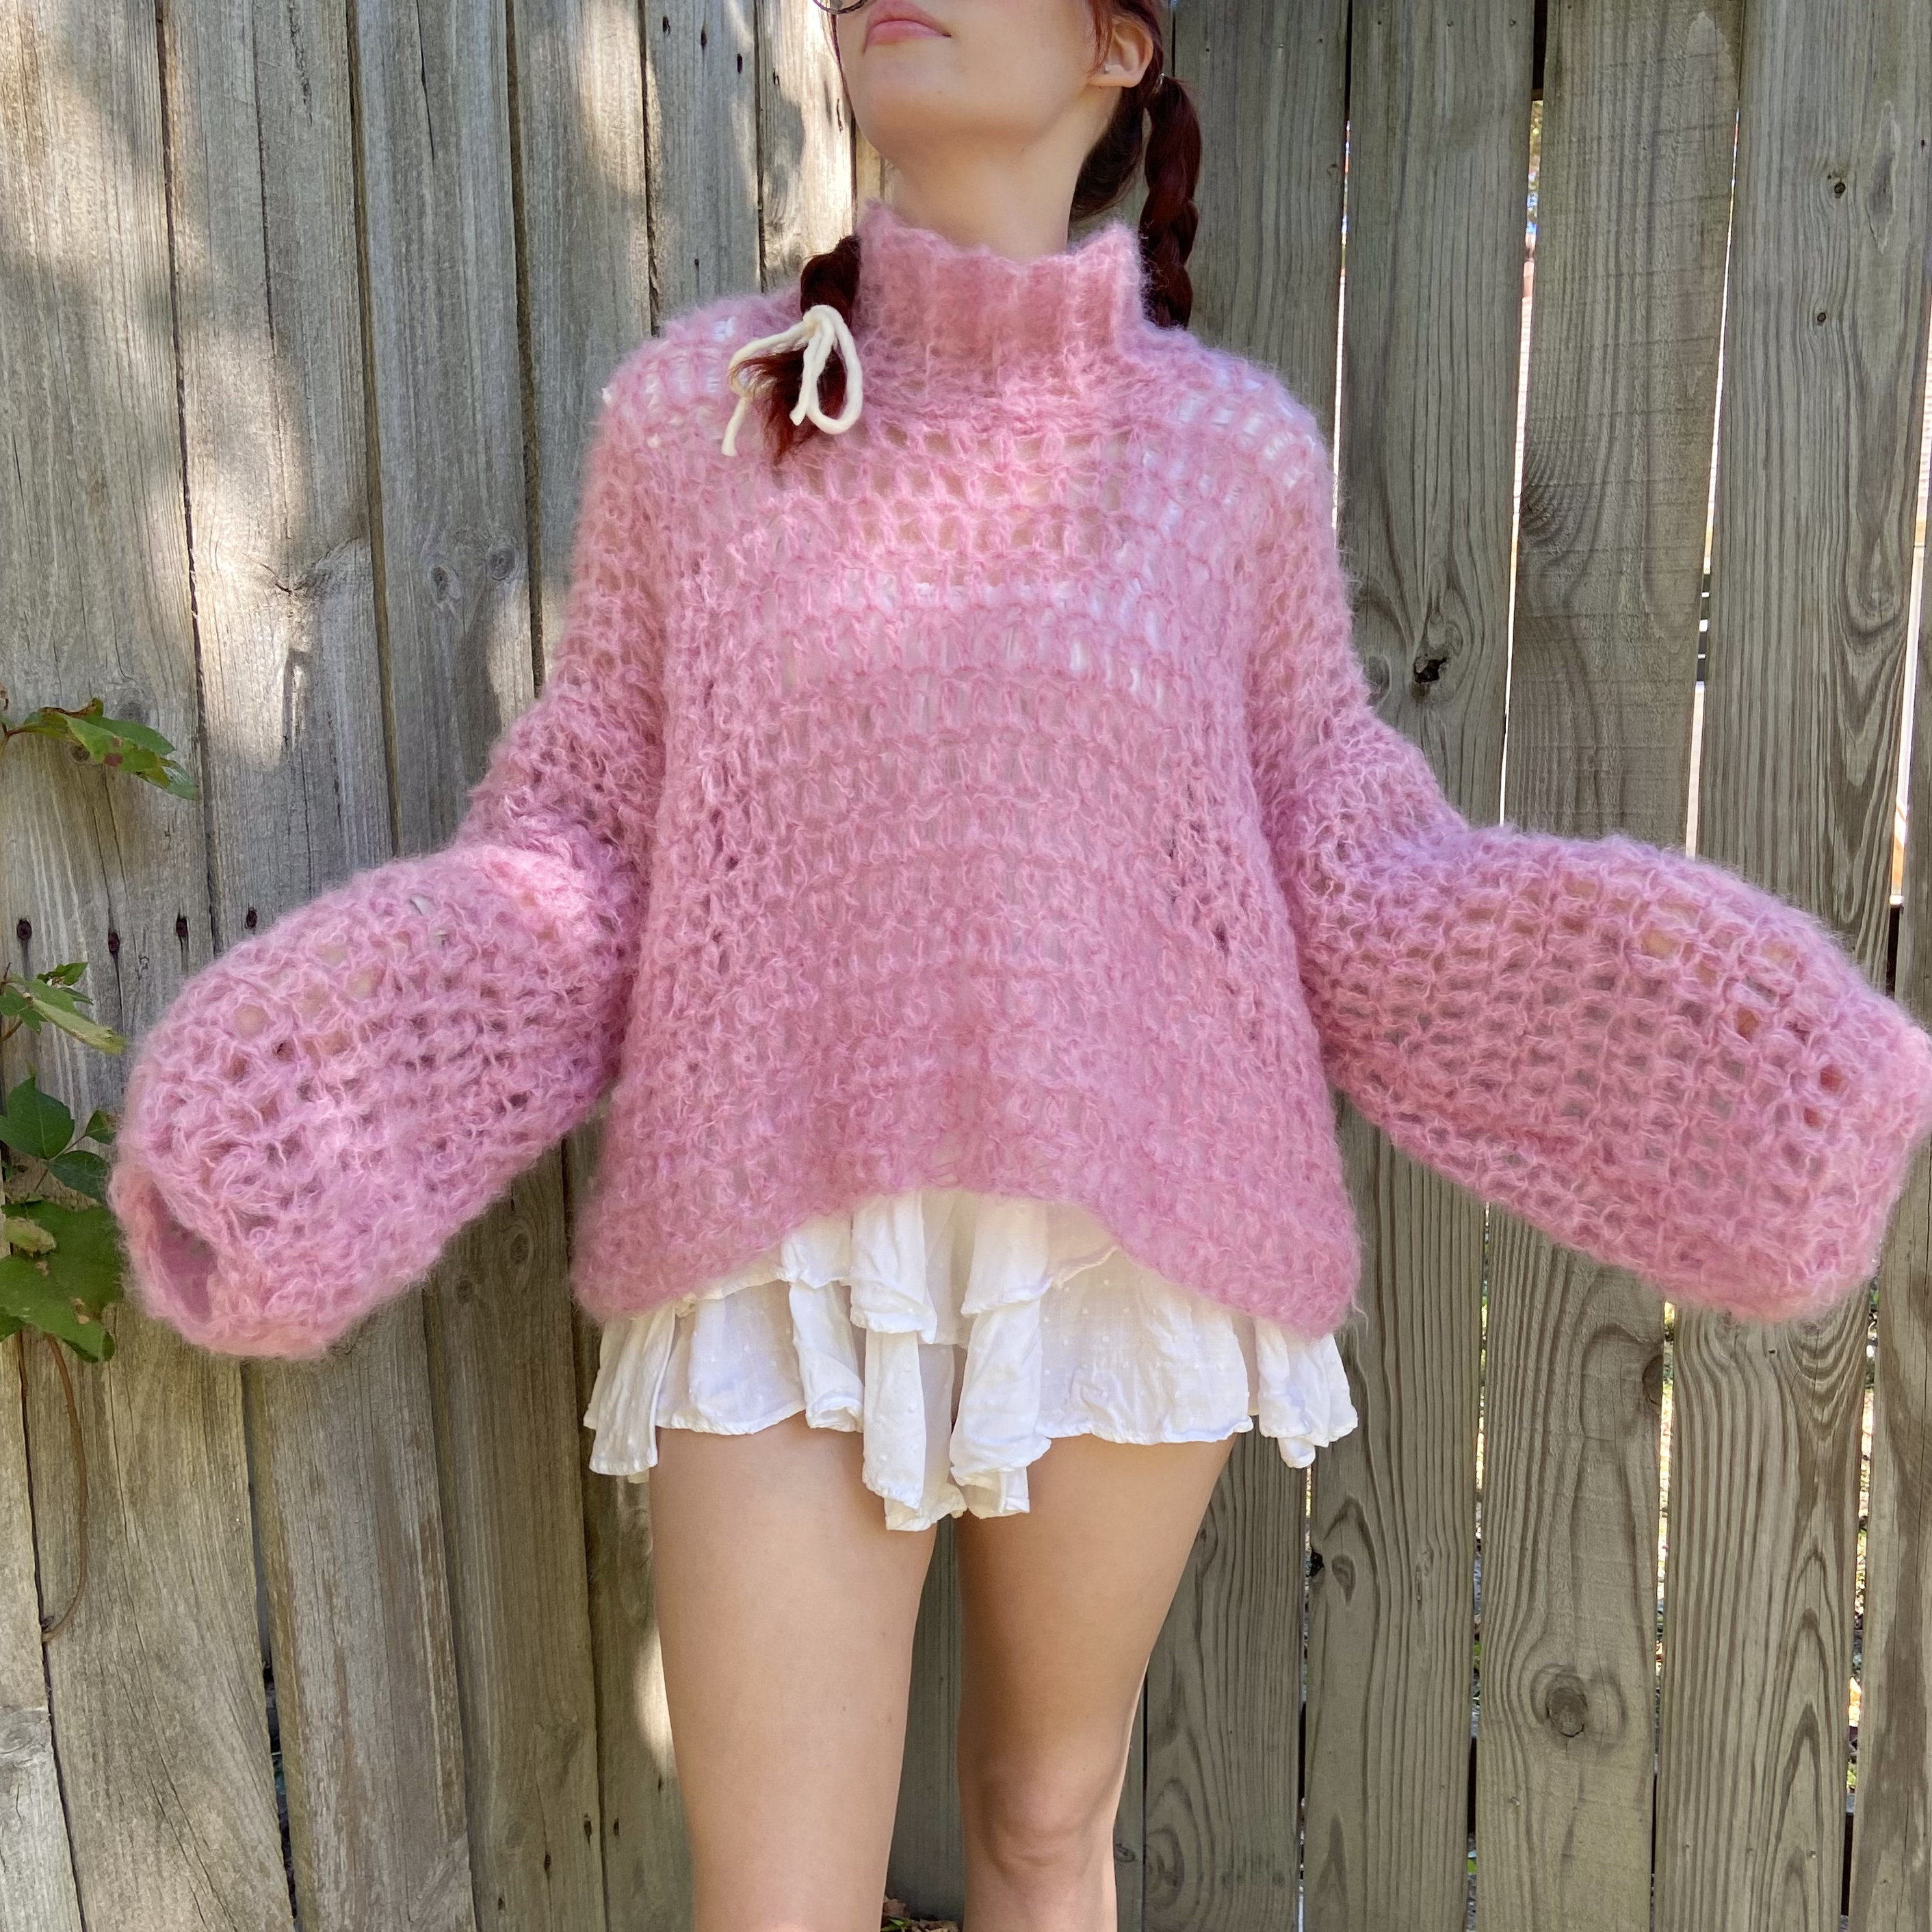 EASY Fluffy Mohair Sweater | ANY SIZE | Free Crochet Pattern +